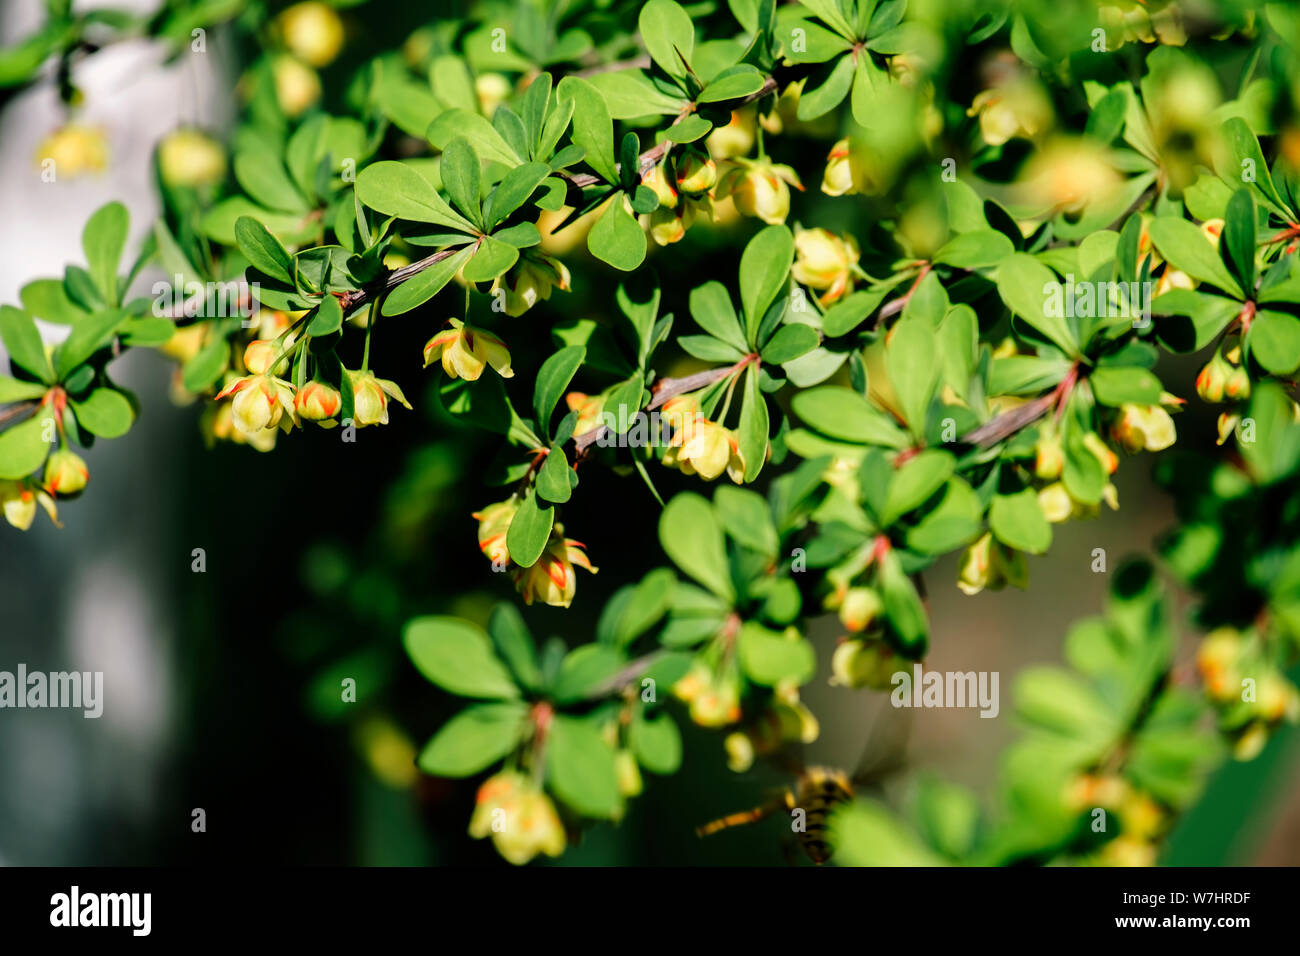 Young spring leaves and flowers of Japanese barberry (Berberis thunbergii) Stock Photo